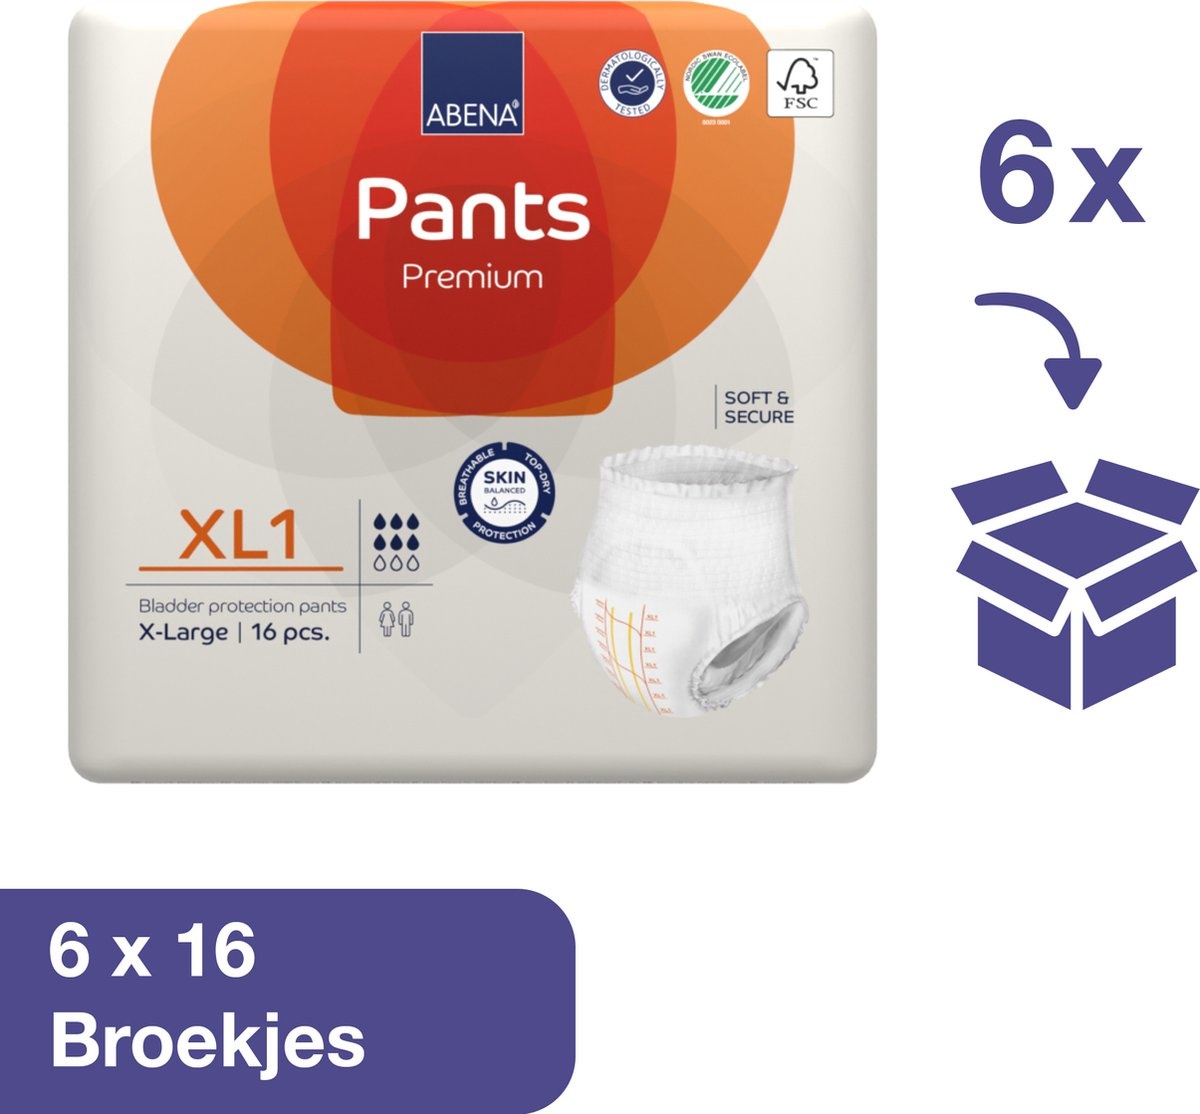 Abena Pants Premium XL1 - 96x Absorbent Pants, to be worn as Regular Underwear - For the Loss of Large Flows of Urine and (Thin) Stool - Hip size 130-170 cm - Absorption 1400 ml - Packaging damaged